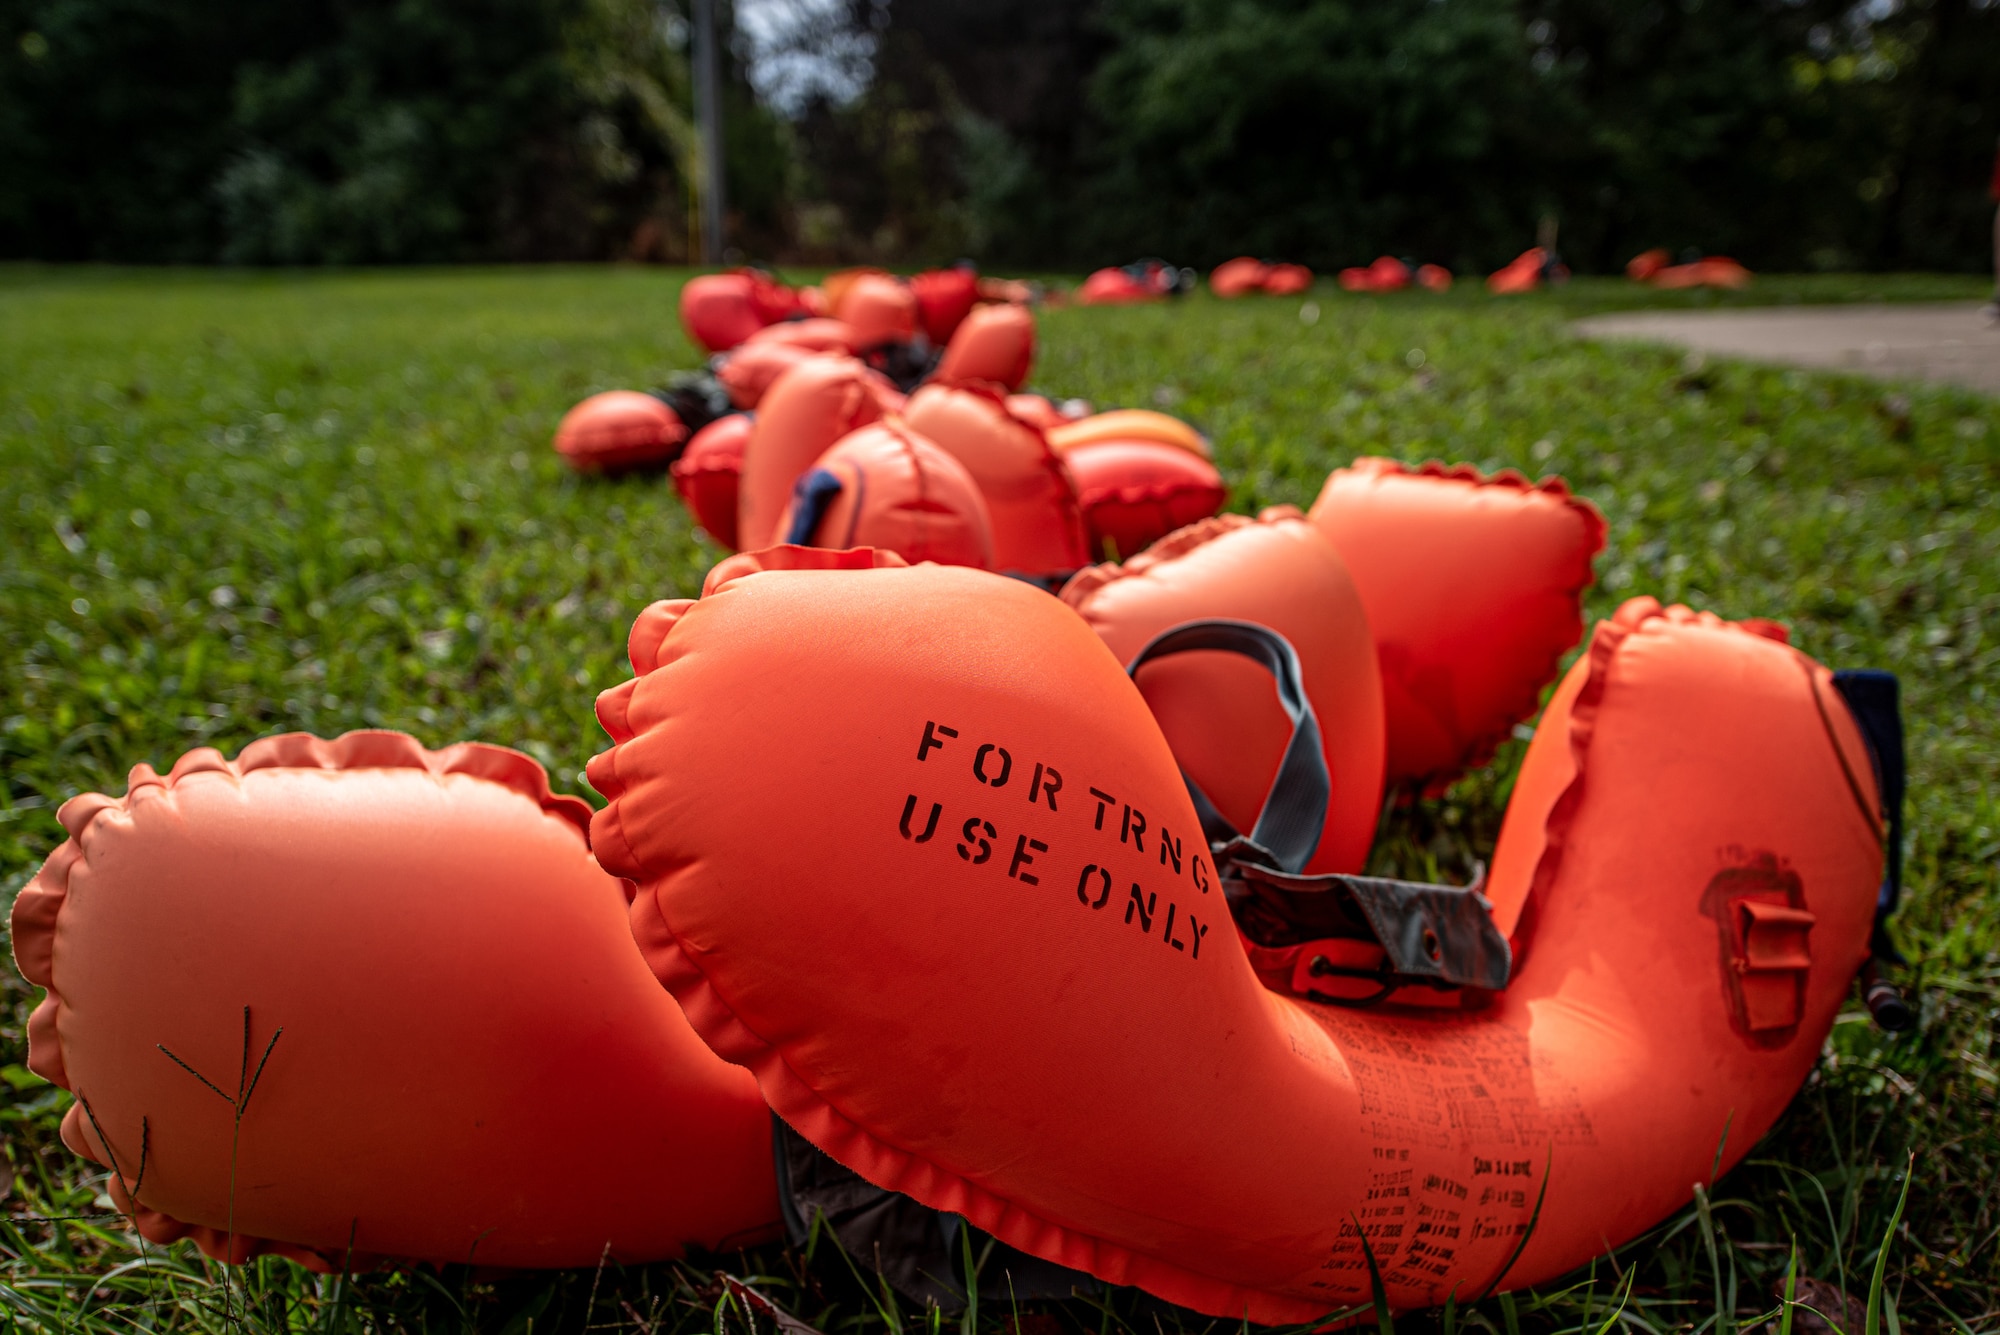 LPU-10/P inflatable life preservers are prepared by aircrew flight equipment specialists from the Kentucky Air National Guard’s 123rd Operations Group to be used for water survival training at Taylorsville Lake in Spencer County, Ky., Sept. 10, 2022. The annual training refreshes aircrew members on skills learned during U.S. Air Force Survival School. (U.S. Air National Guard photo by Tech. Sgt. Joshua Horton)